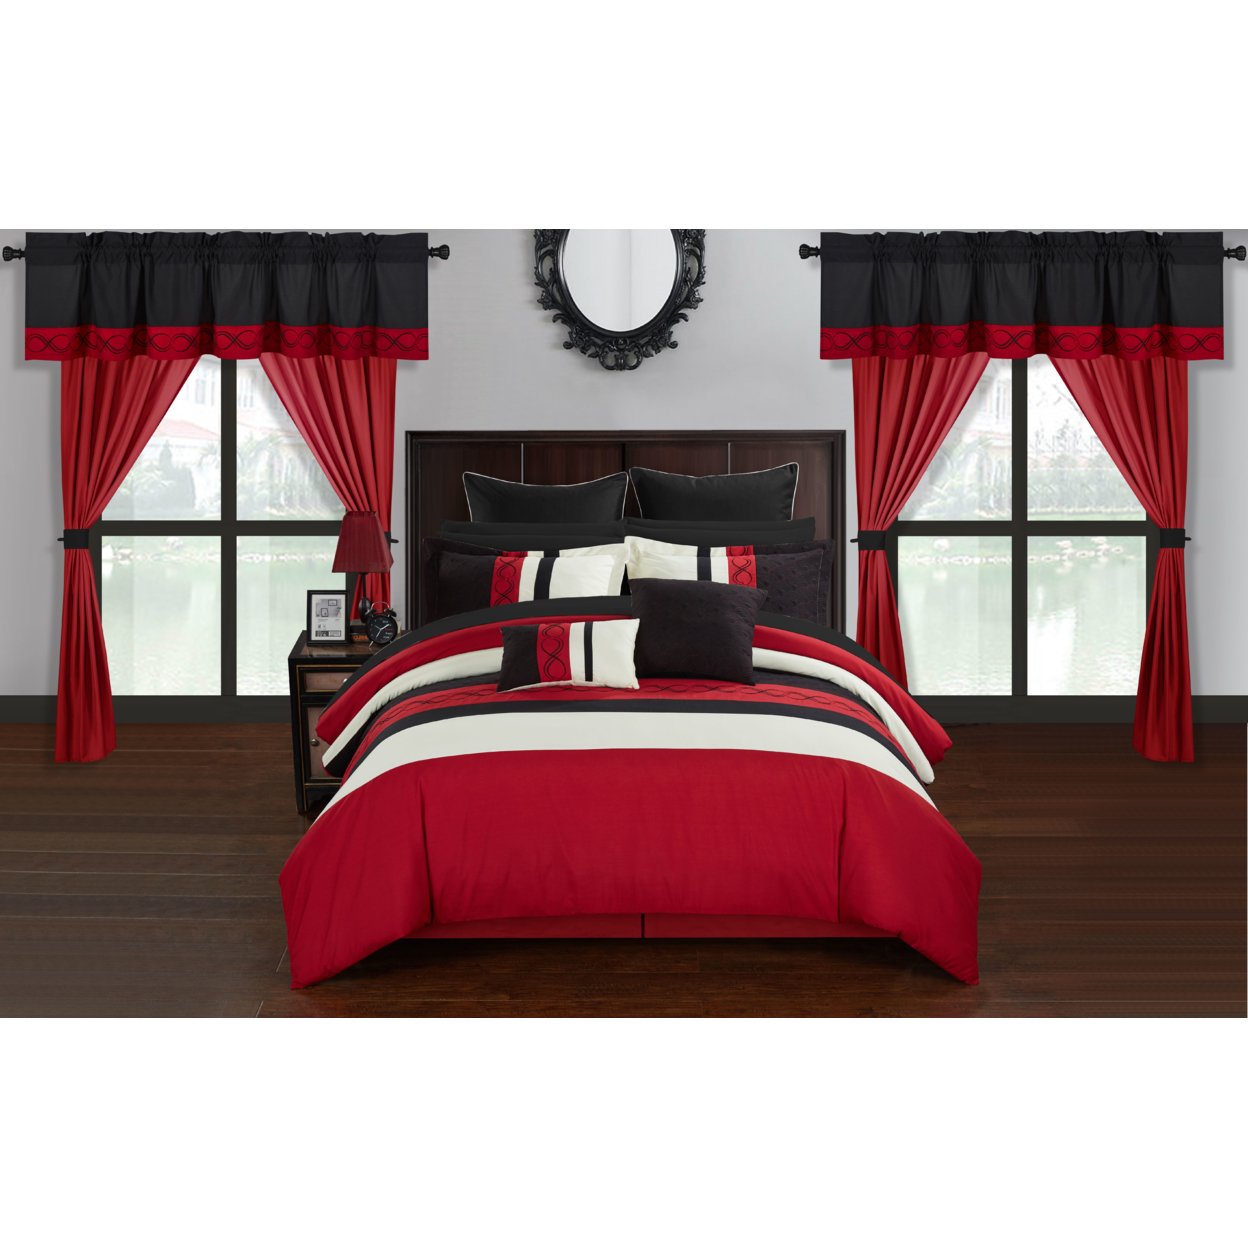 Chic Home Yair 24 Piece Comforter Set Color Block Embroidered Design Complete Bed in a Bag Bedding - Red, Queen